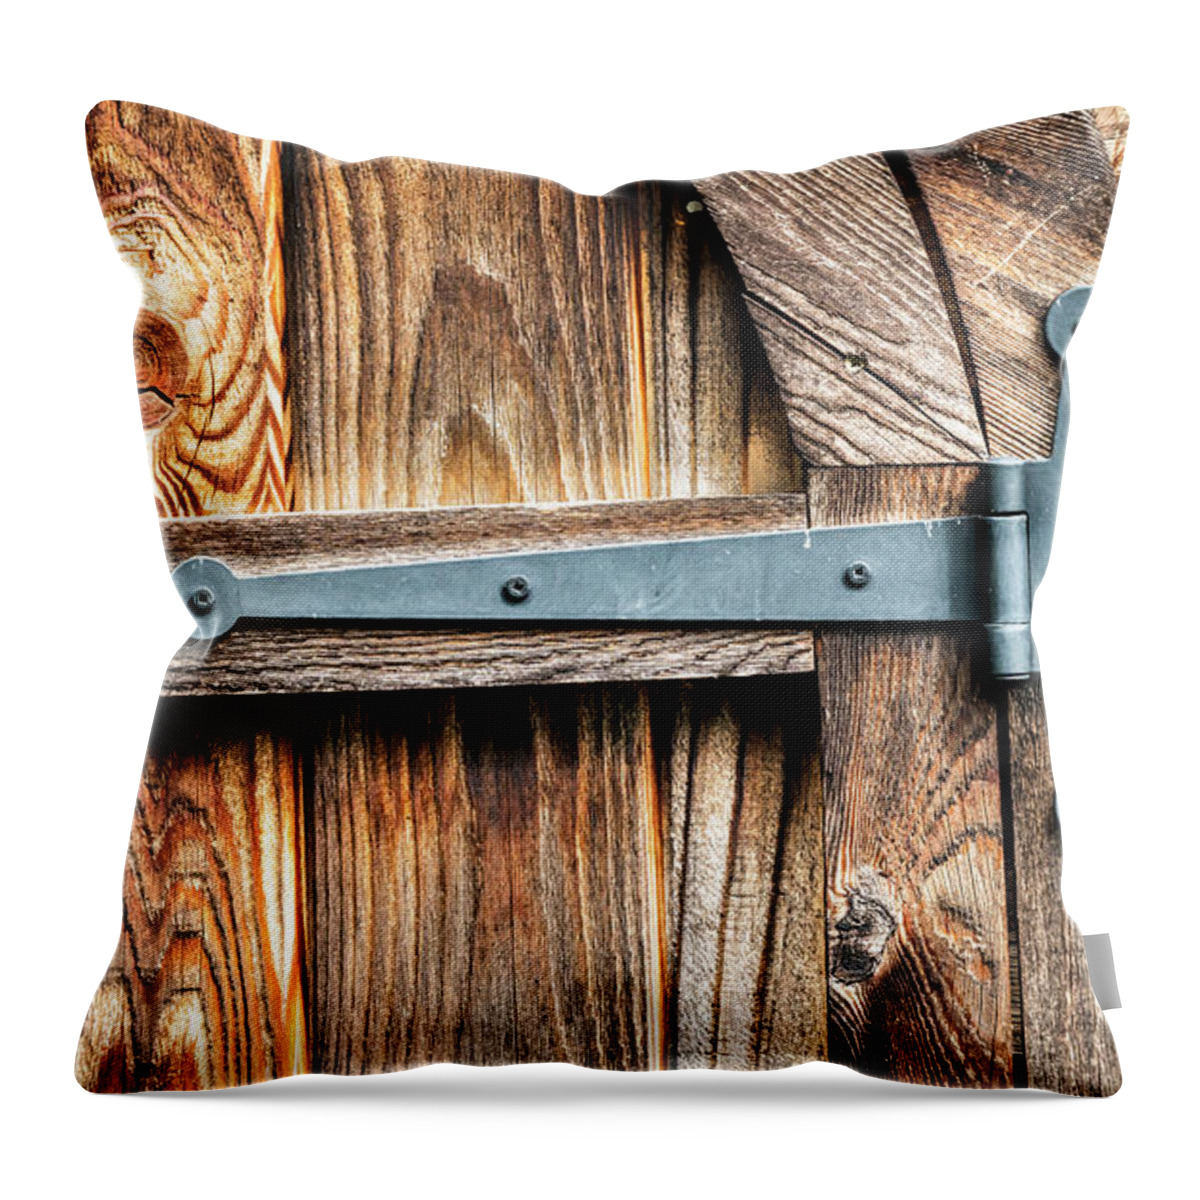 Wood Throw Pillow featuring the photograph A Knotty Doorway Up Close by Gary Slawsky